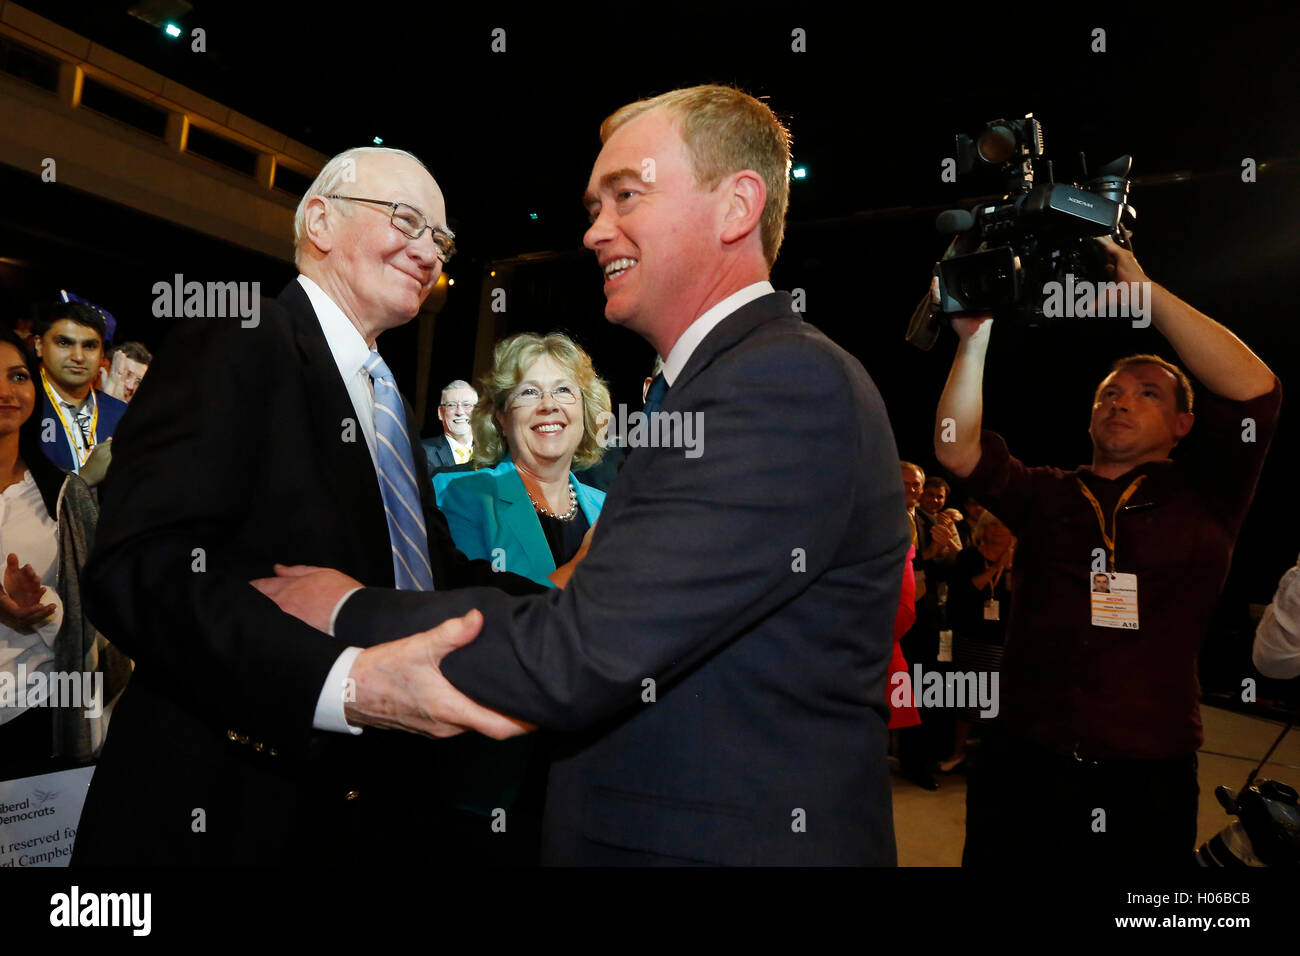 Brighton, UK. 20th Sep, 2016. Tim Farron, Party Leader greets Menzies 'Ming'  Campbell  at the close of his keynote speech during the Liberal Democrats Autumn Conference at Brighton, UK, Tuesday September 20, 2016.       Credit:  Luke MacGregor/Alamy Live News Stock Photo